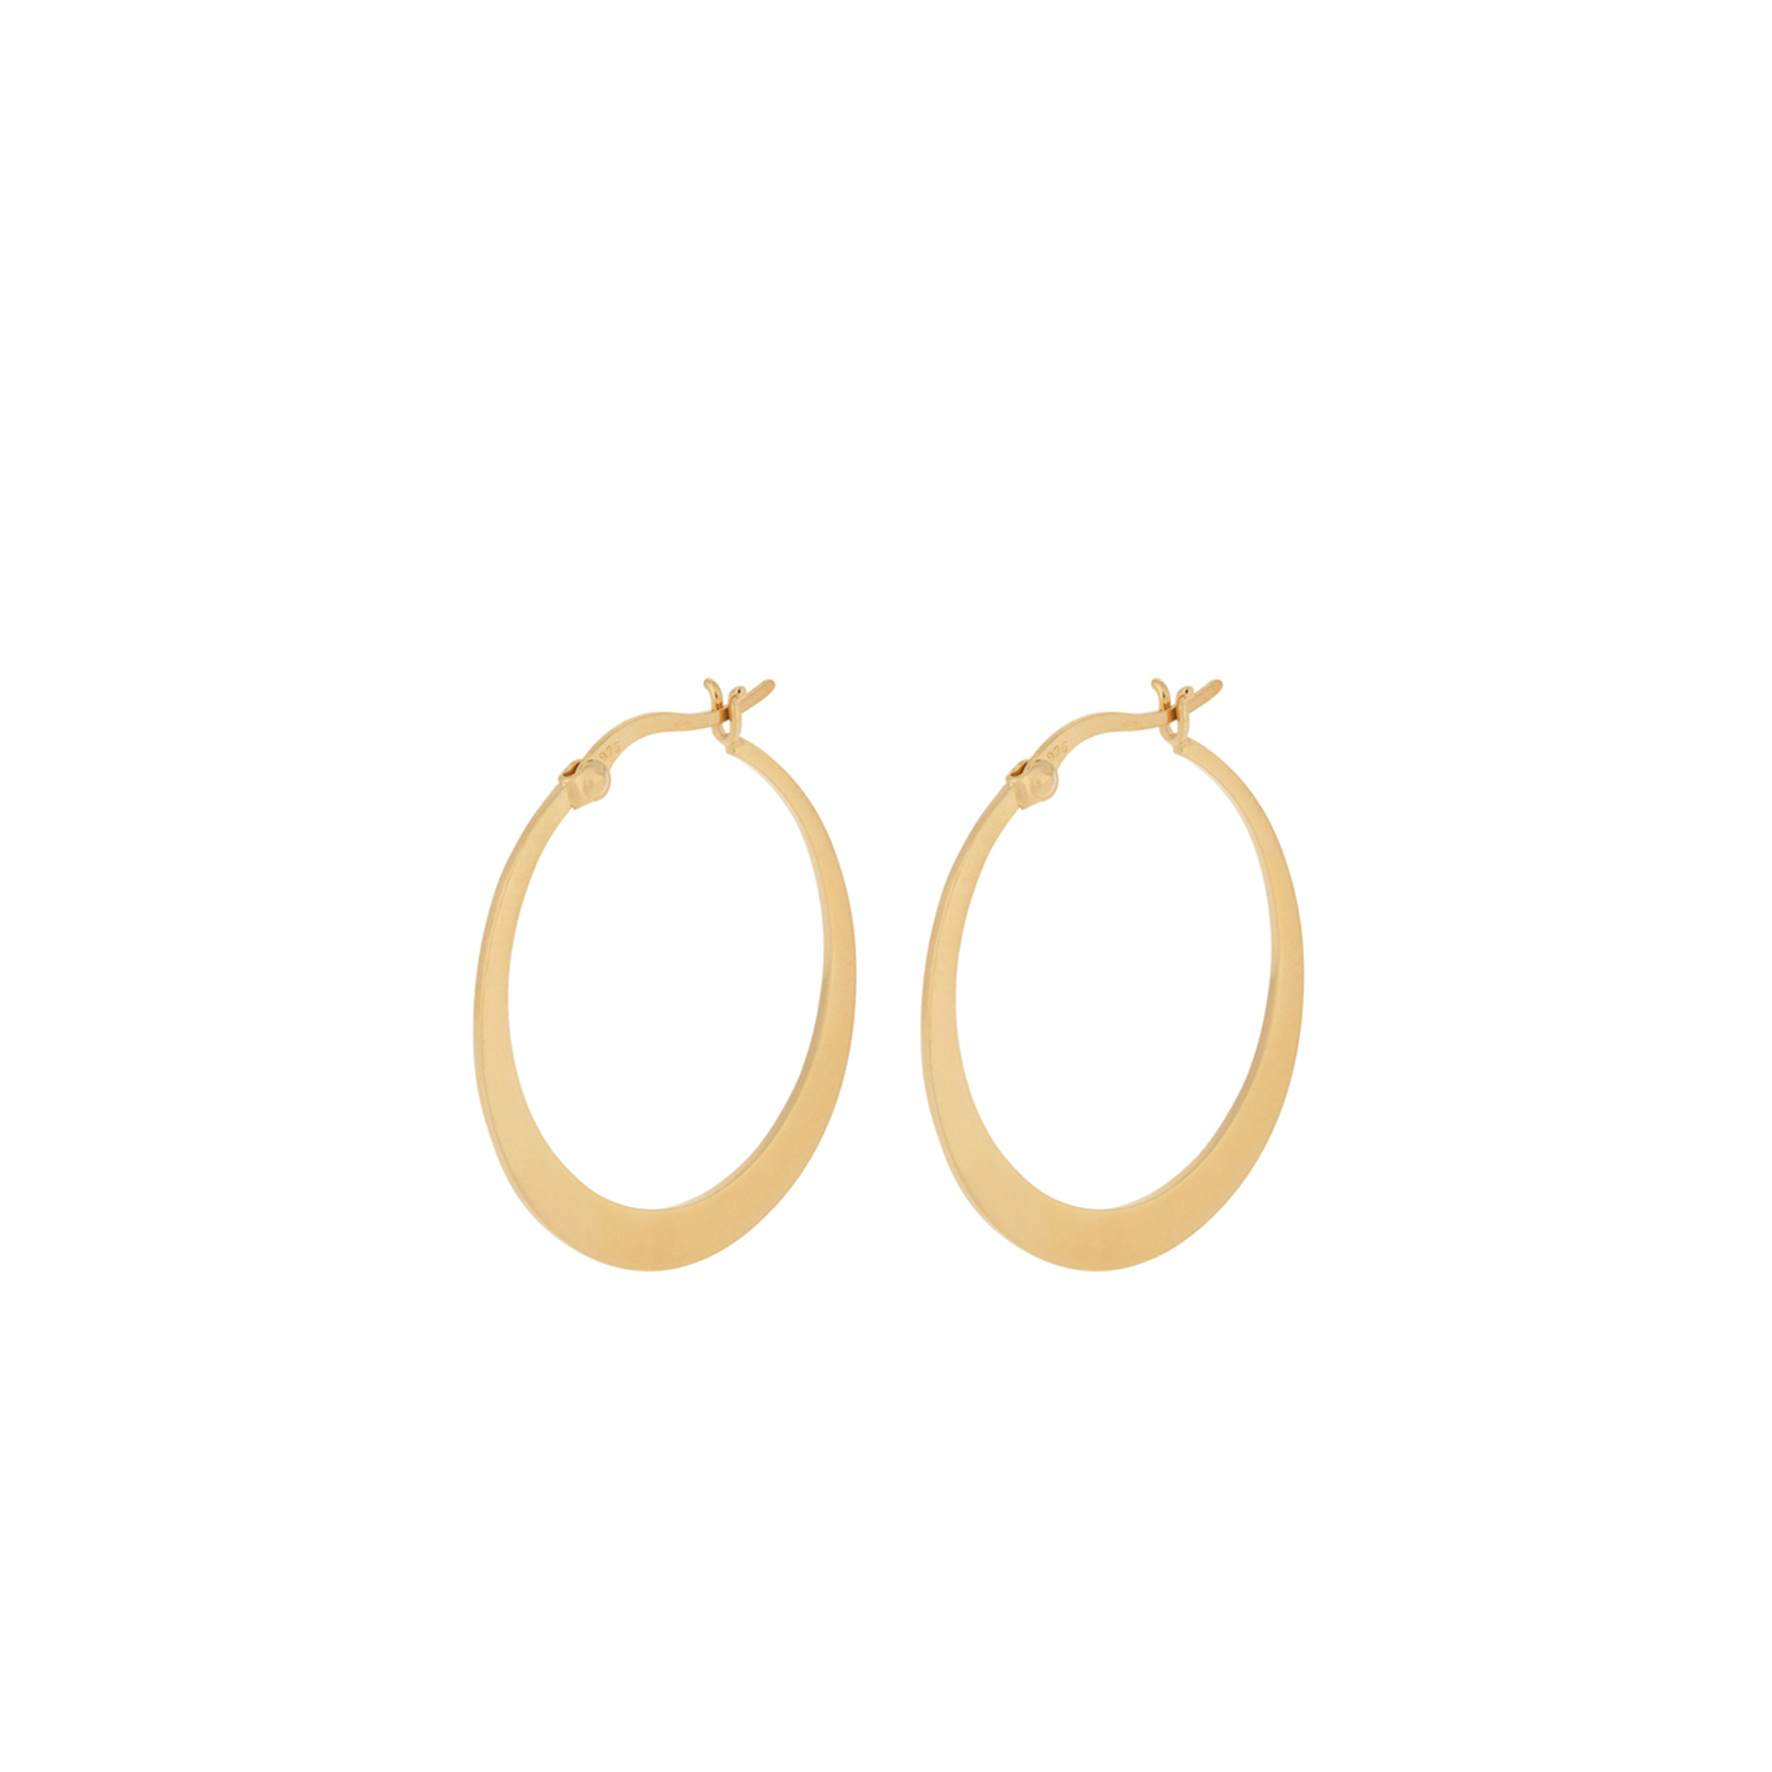 Escape Hoops Small from Pernille Corydon in Goldplated-Silver Sterling 925